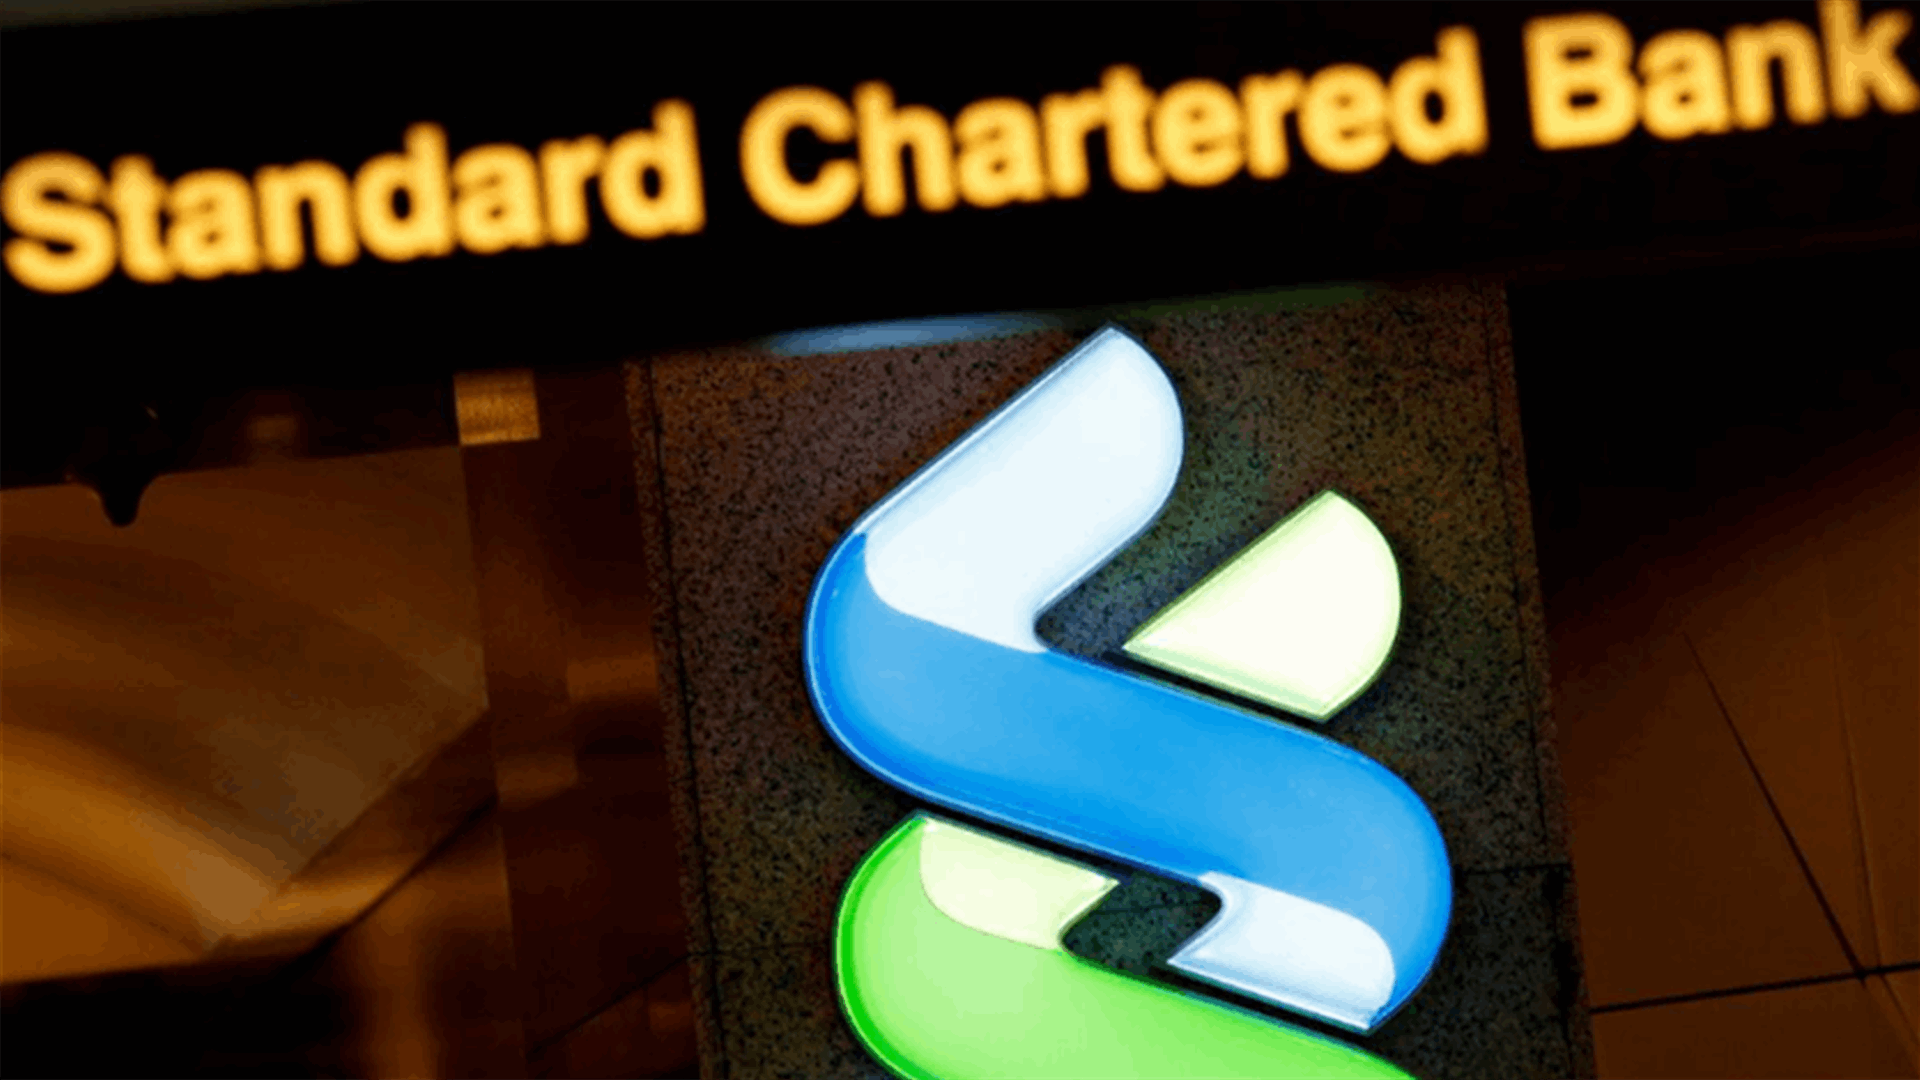 First Abu Dhabi Bank says it had considered making offer for StanChart